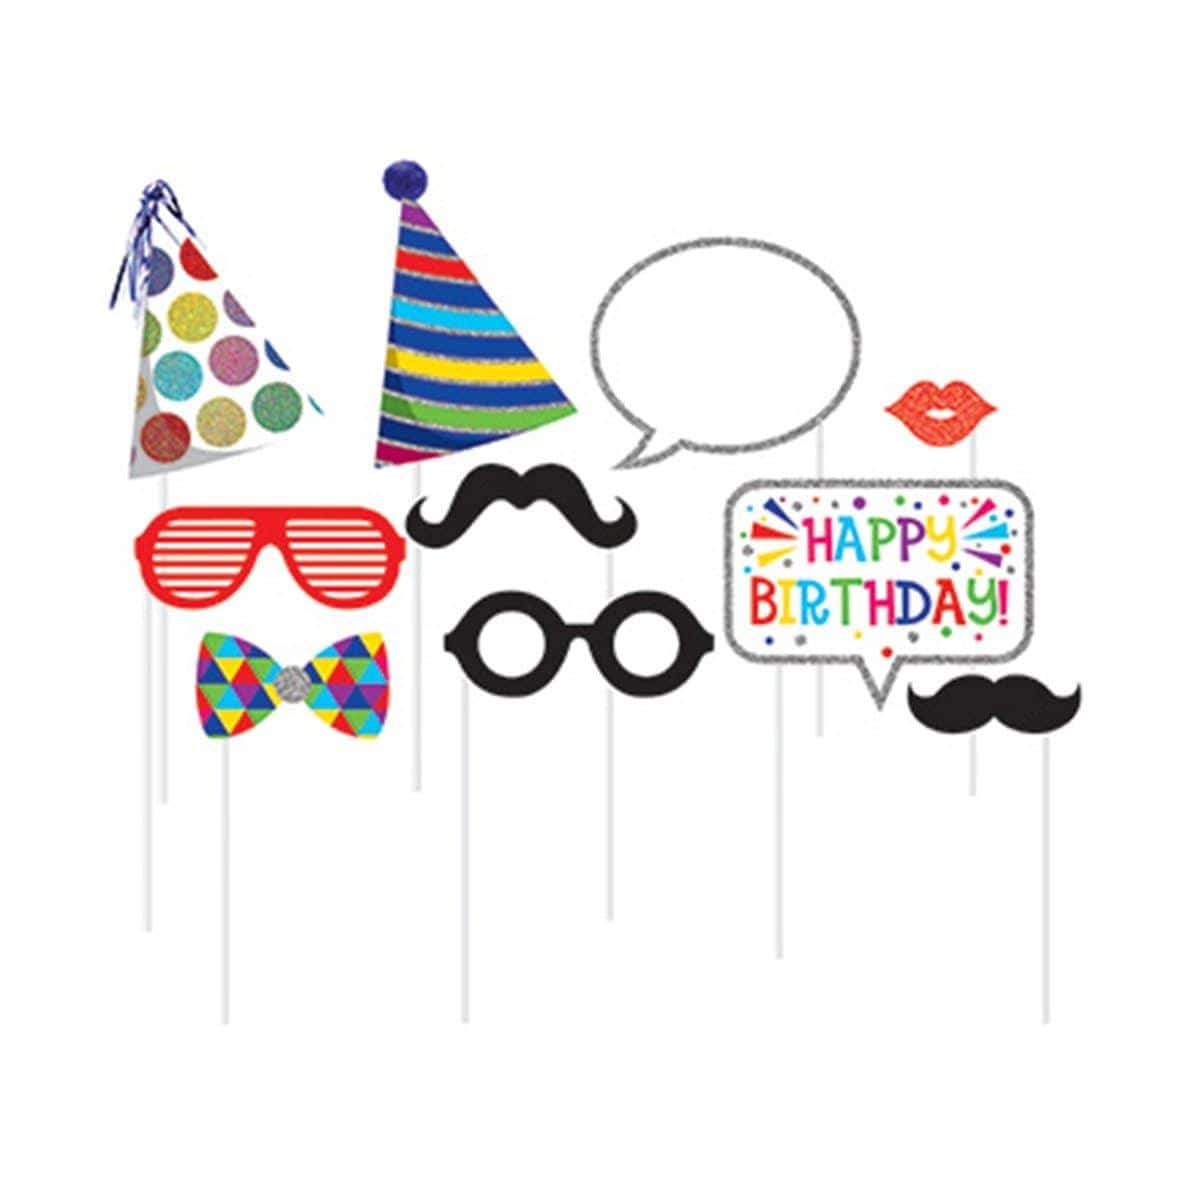 Buy General Birthday Photobooth Accessories - Birthday sold at Party Expert